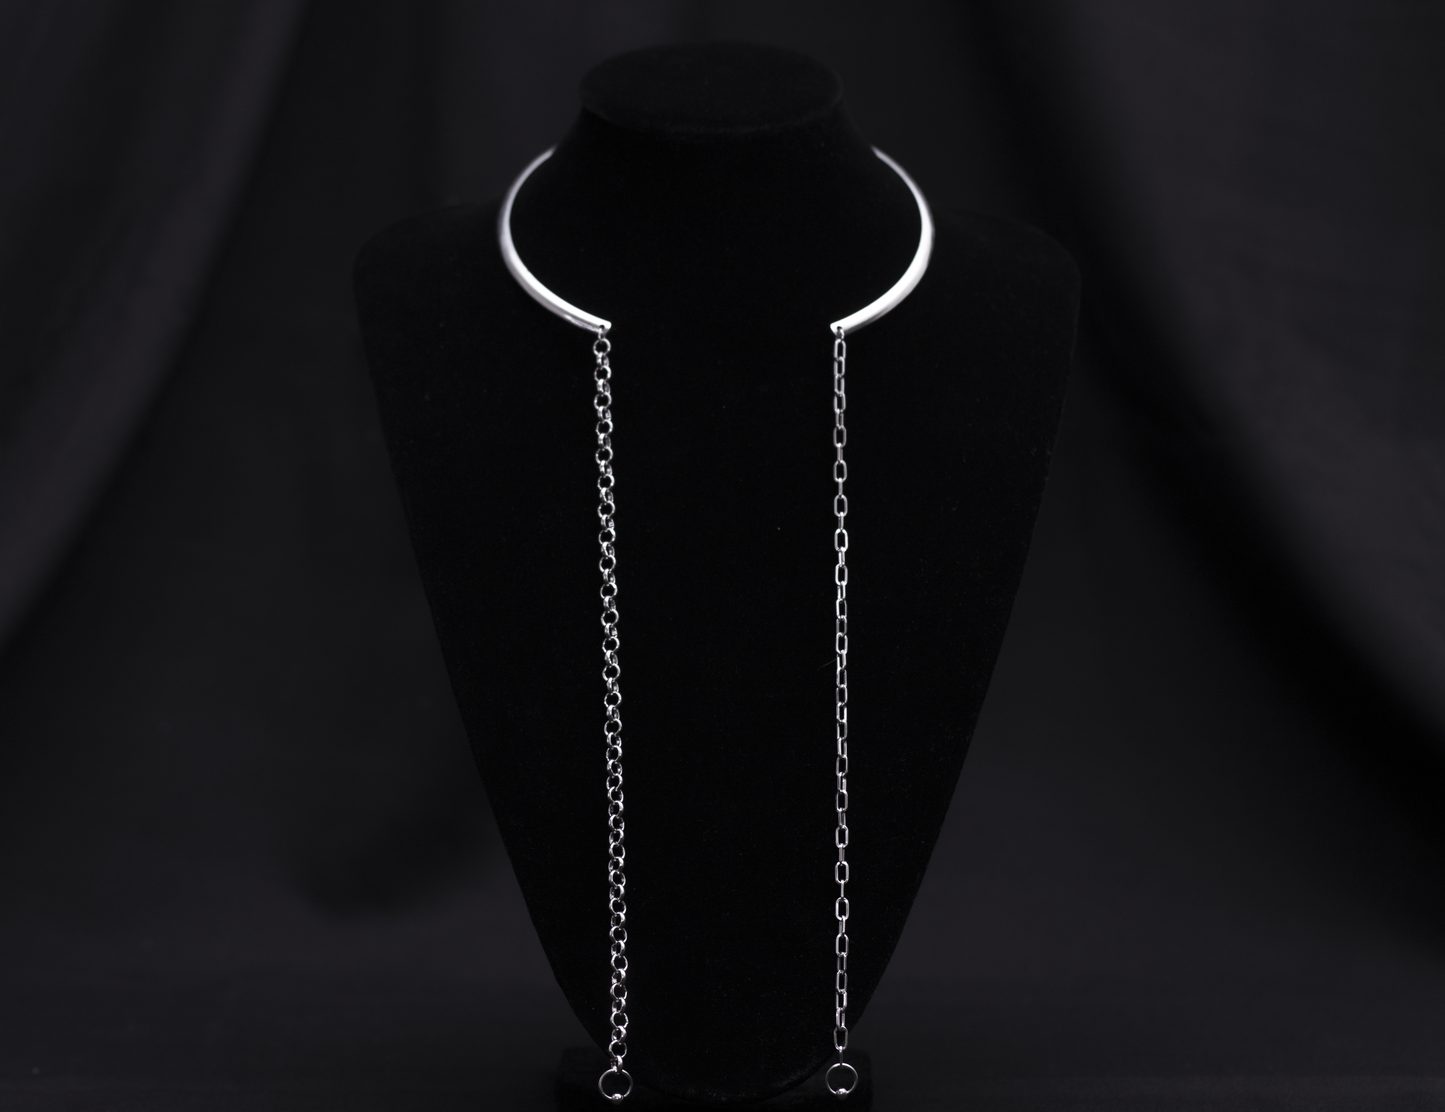  A sleek and minimal Myril Jewels necklace features a rigid, crescent-shaped neckline with long, delicate chains draping elegantly on a black velvet mannequin. This piece embodies the subtle edge of neo-gothic design, making it versatile for Witchcore enthusiasts, Halloween adornment, or as a sophisticated everyday accessory.